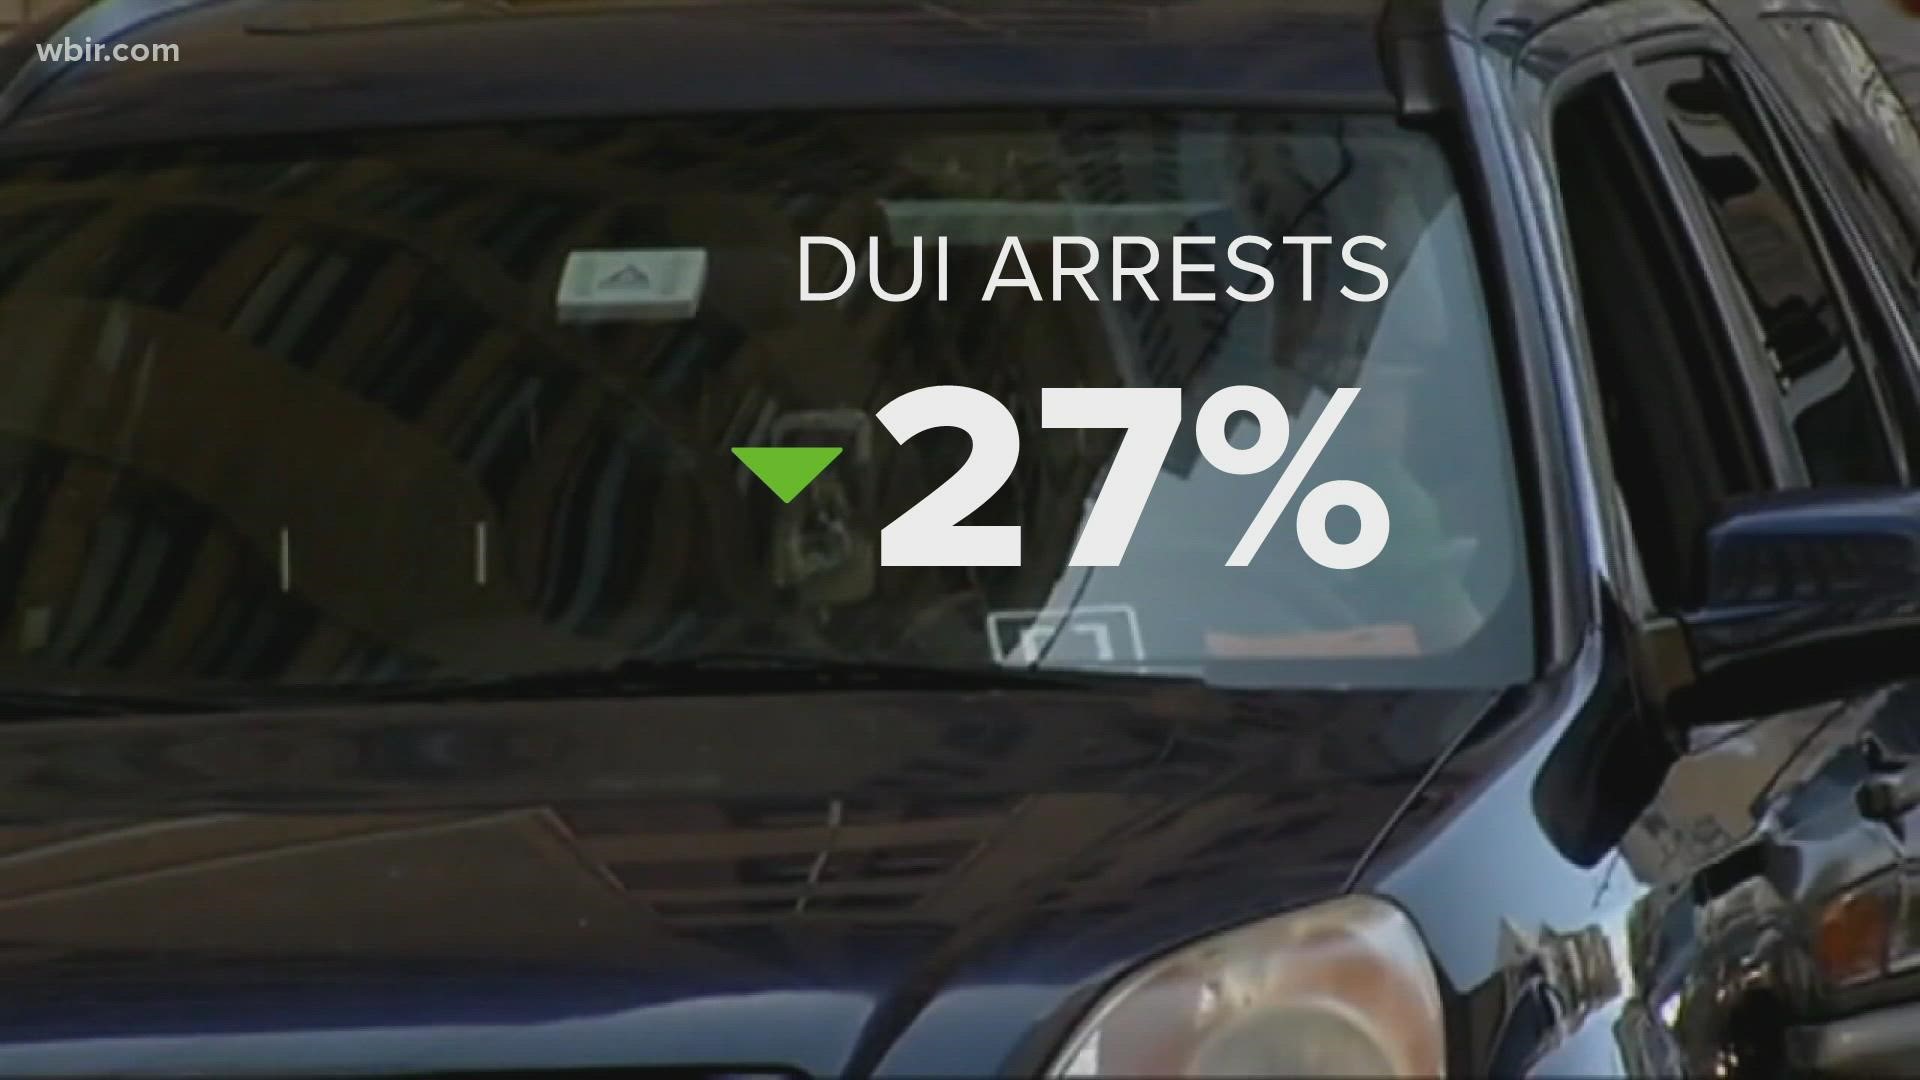 Some officials say the 27% drop in DUI arrests is because of ride-sharing apps like Uber and Lyft.